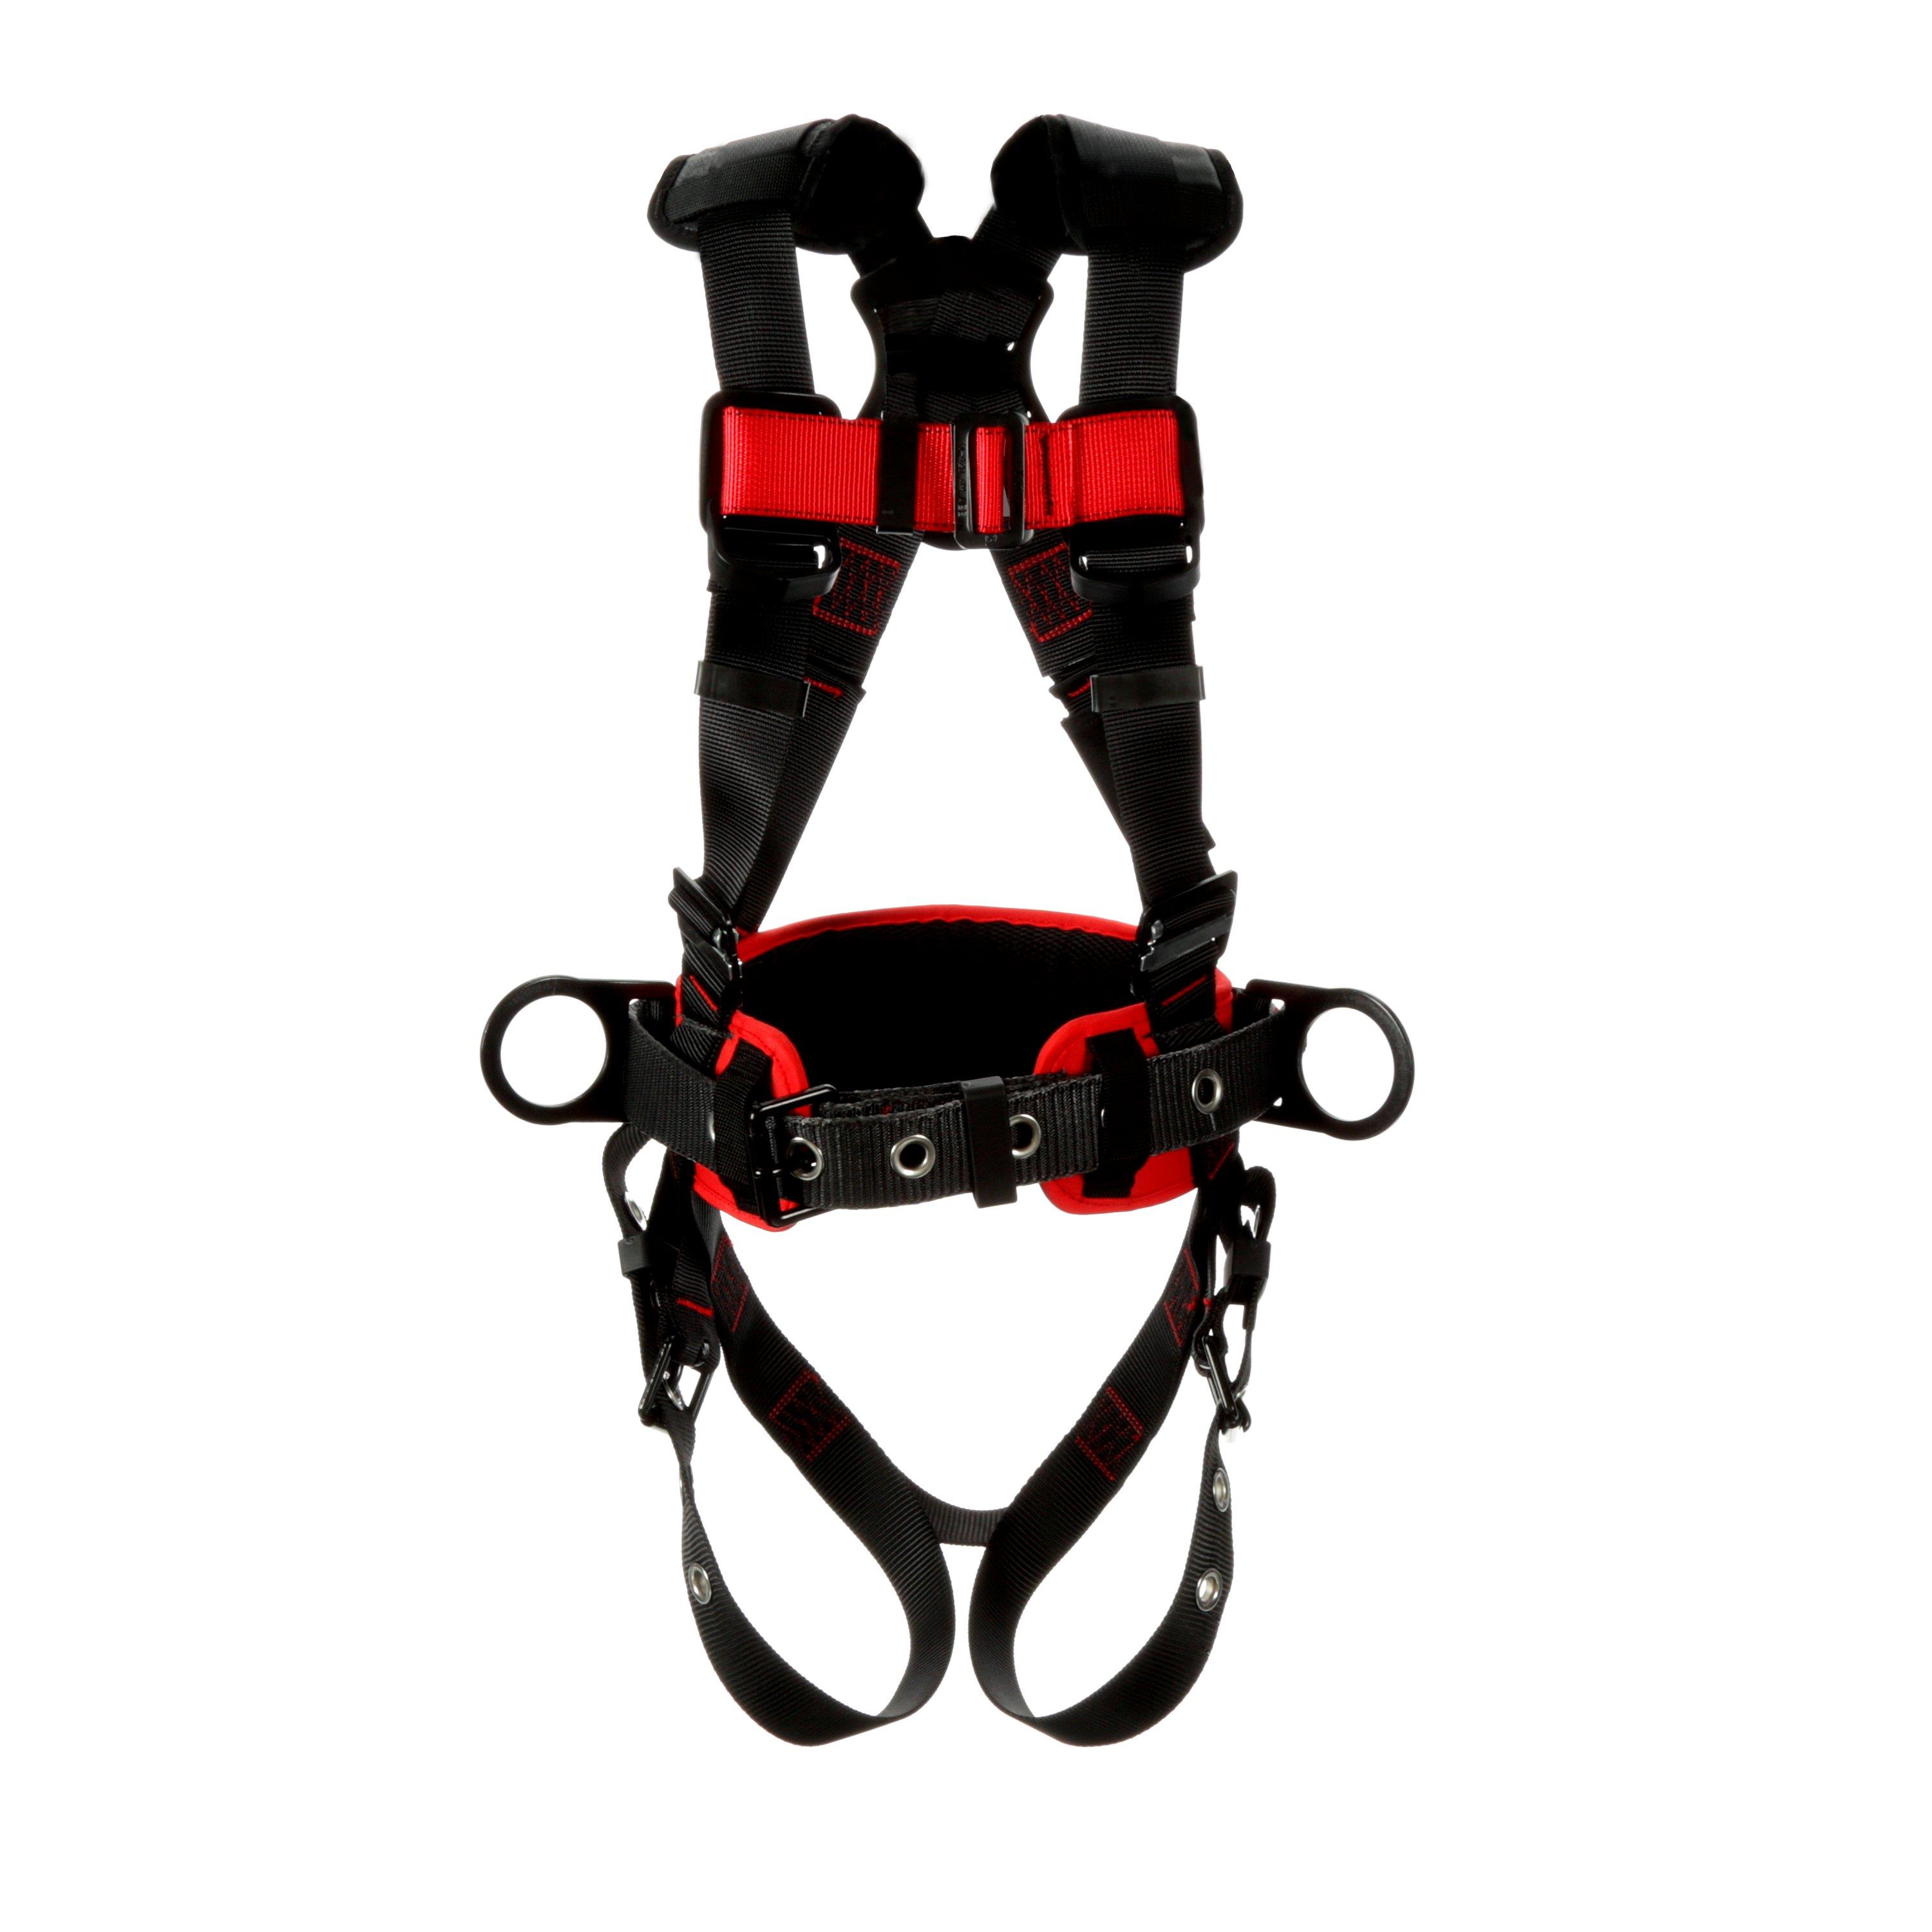 Protecta Pro Construction Harness TB 3Ds - Boss Boots